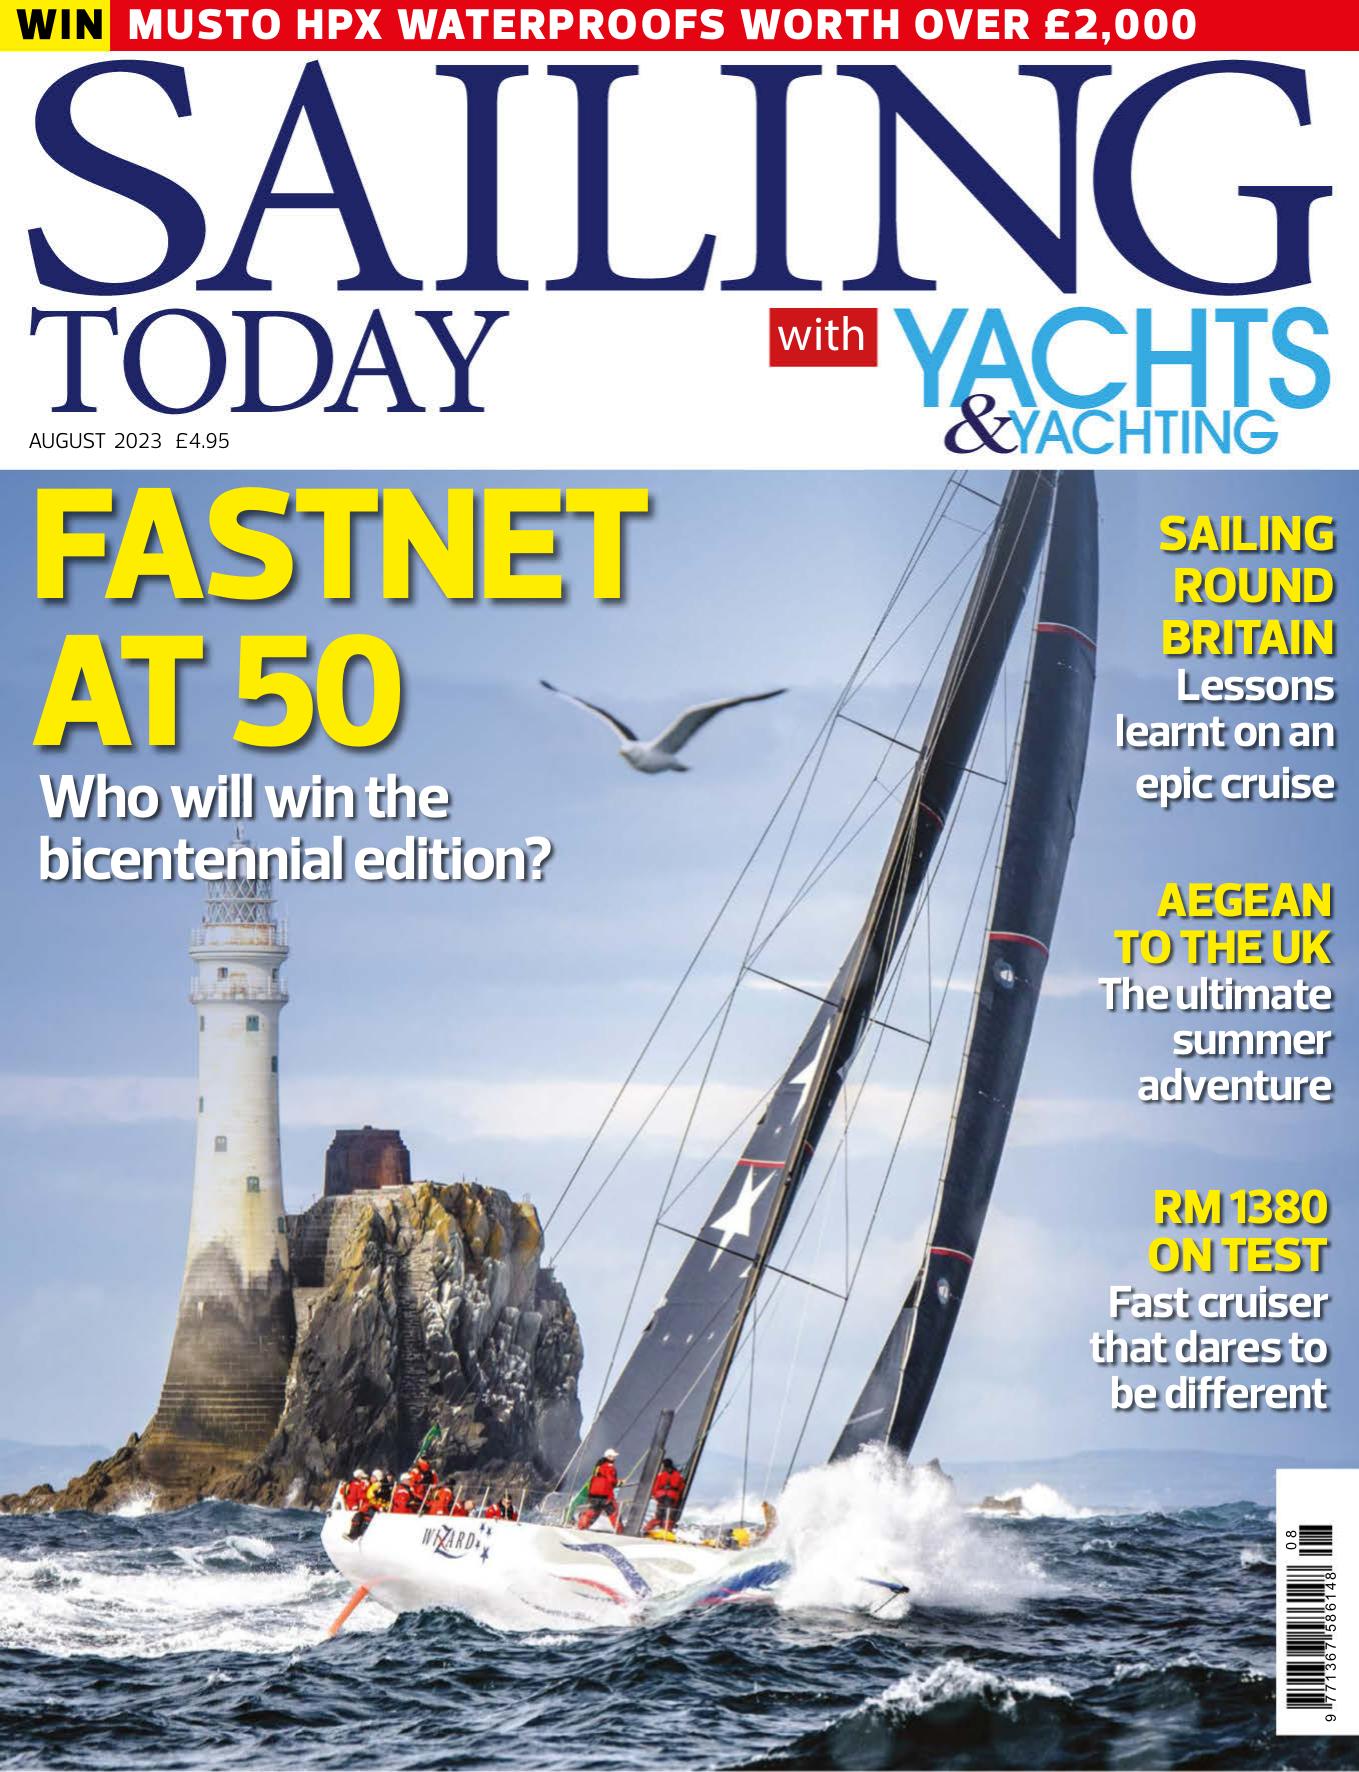 Yachts and Yachting Magazine - August 2023